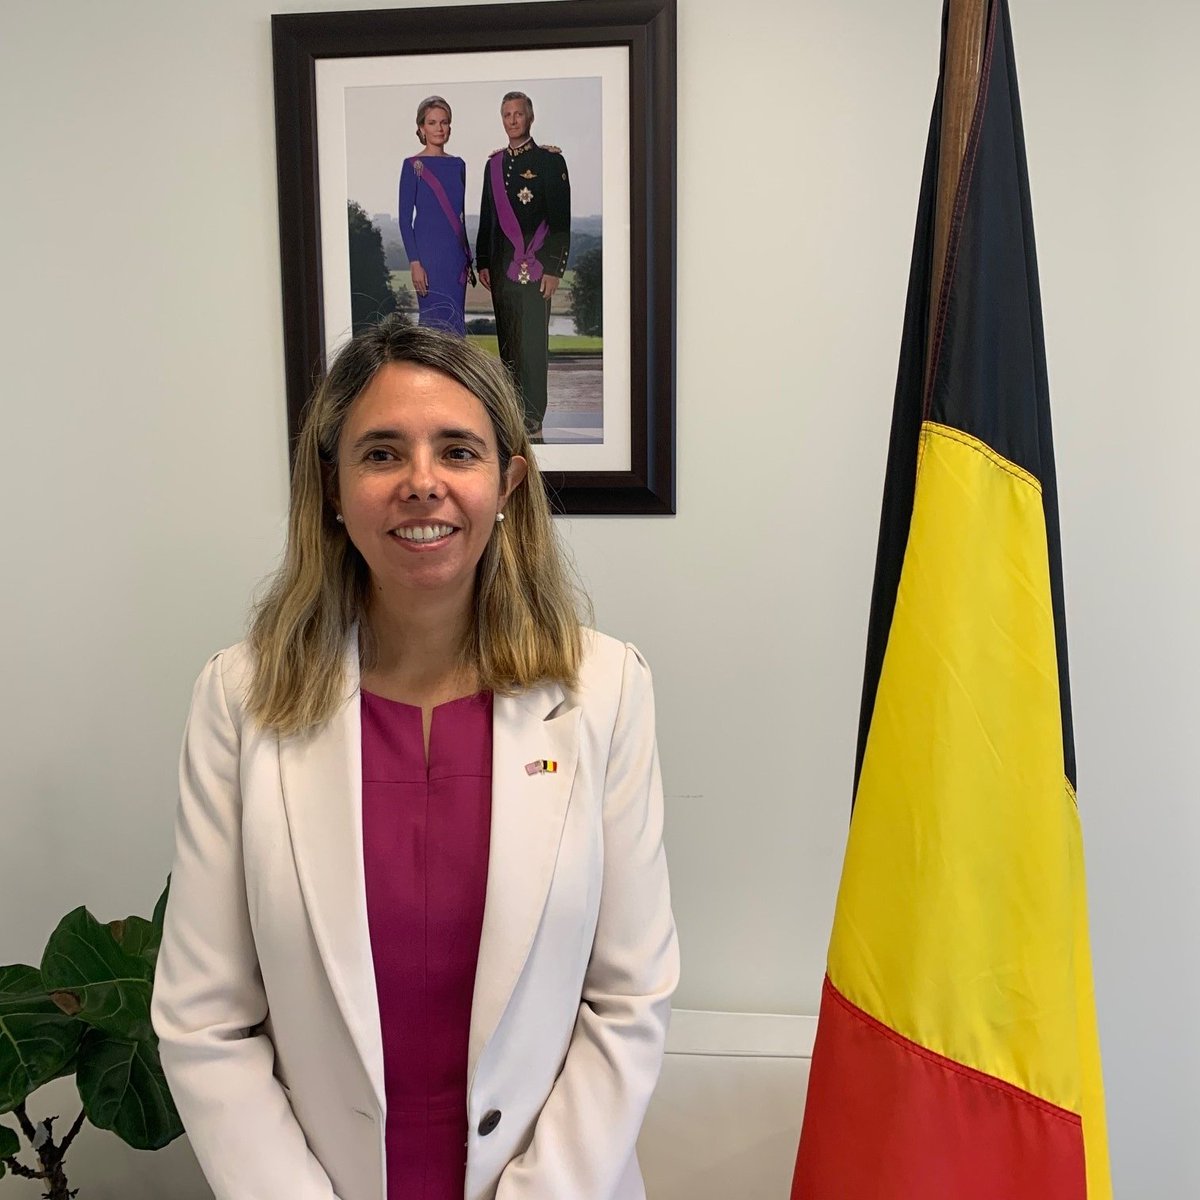 A warm welcome to our new Consul General of Belgium in Los Angeles, Mrs. Sophie Hottat.
On behalf of our team, and the Belgian community west of the Mississippi:
Bienvenue à Los Angeles ! - Welkom in Los Angeles!
We wish you and your family a great 4 years ahead.